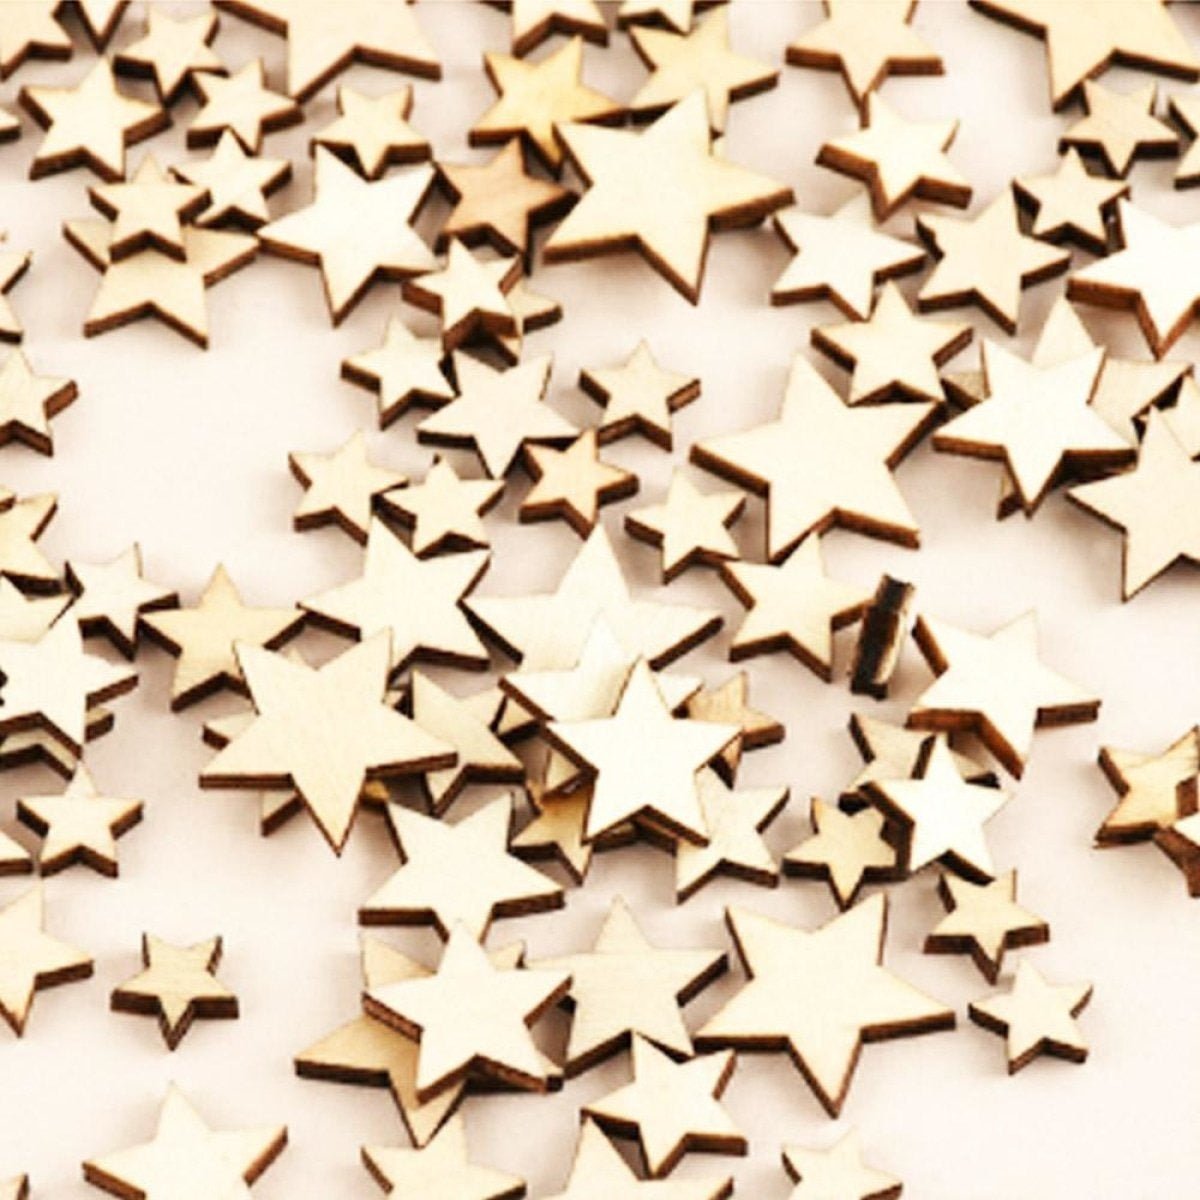 200pcs Wooden Stars Small Confetti 10-20mm Wood Crafts Decorations - Asia Sell